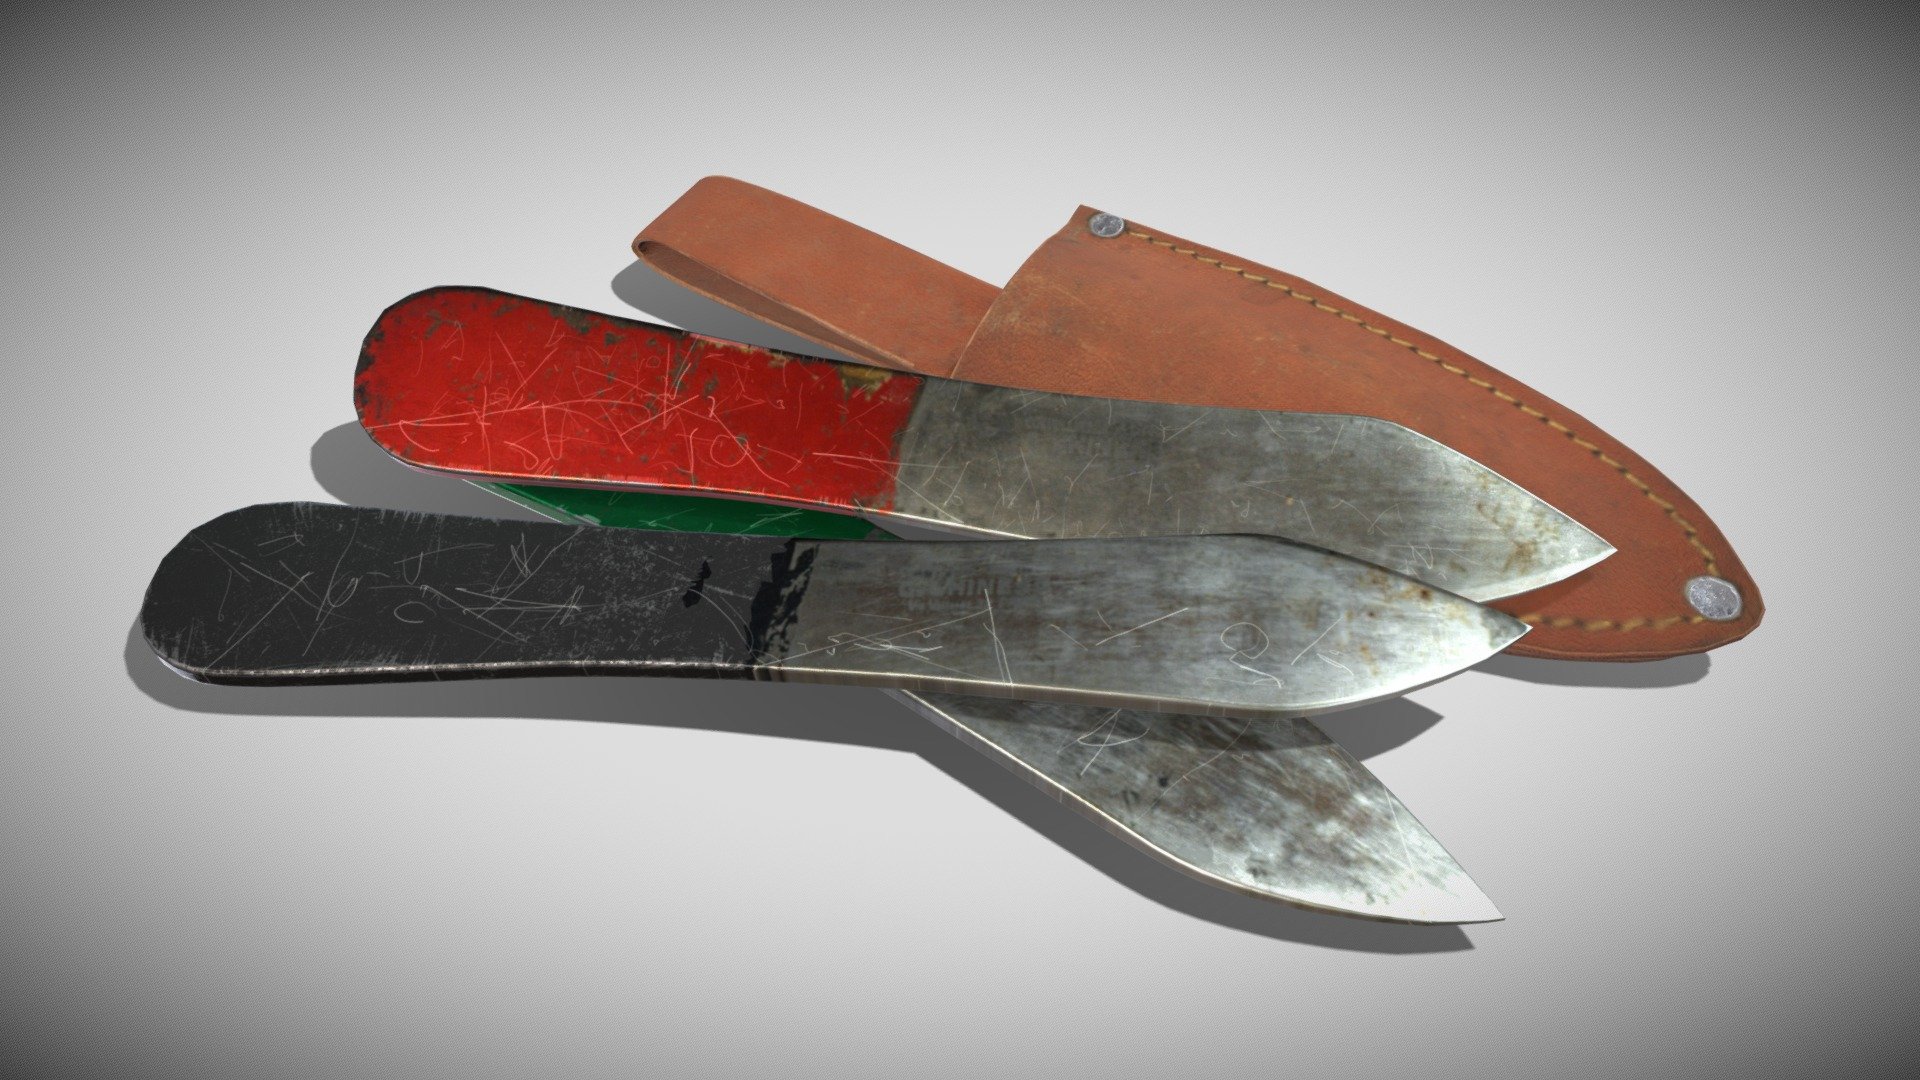 2 Material 4k PBR Metalness

Separate Objects

Quads - Throwing Knives - Coltelli Lancio - Buy Royalty Free 3D model by Francesco Coldesina (@topfrank2013) 3d model